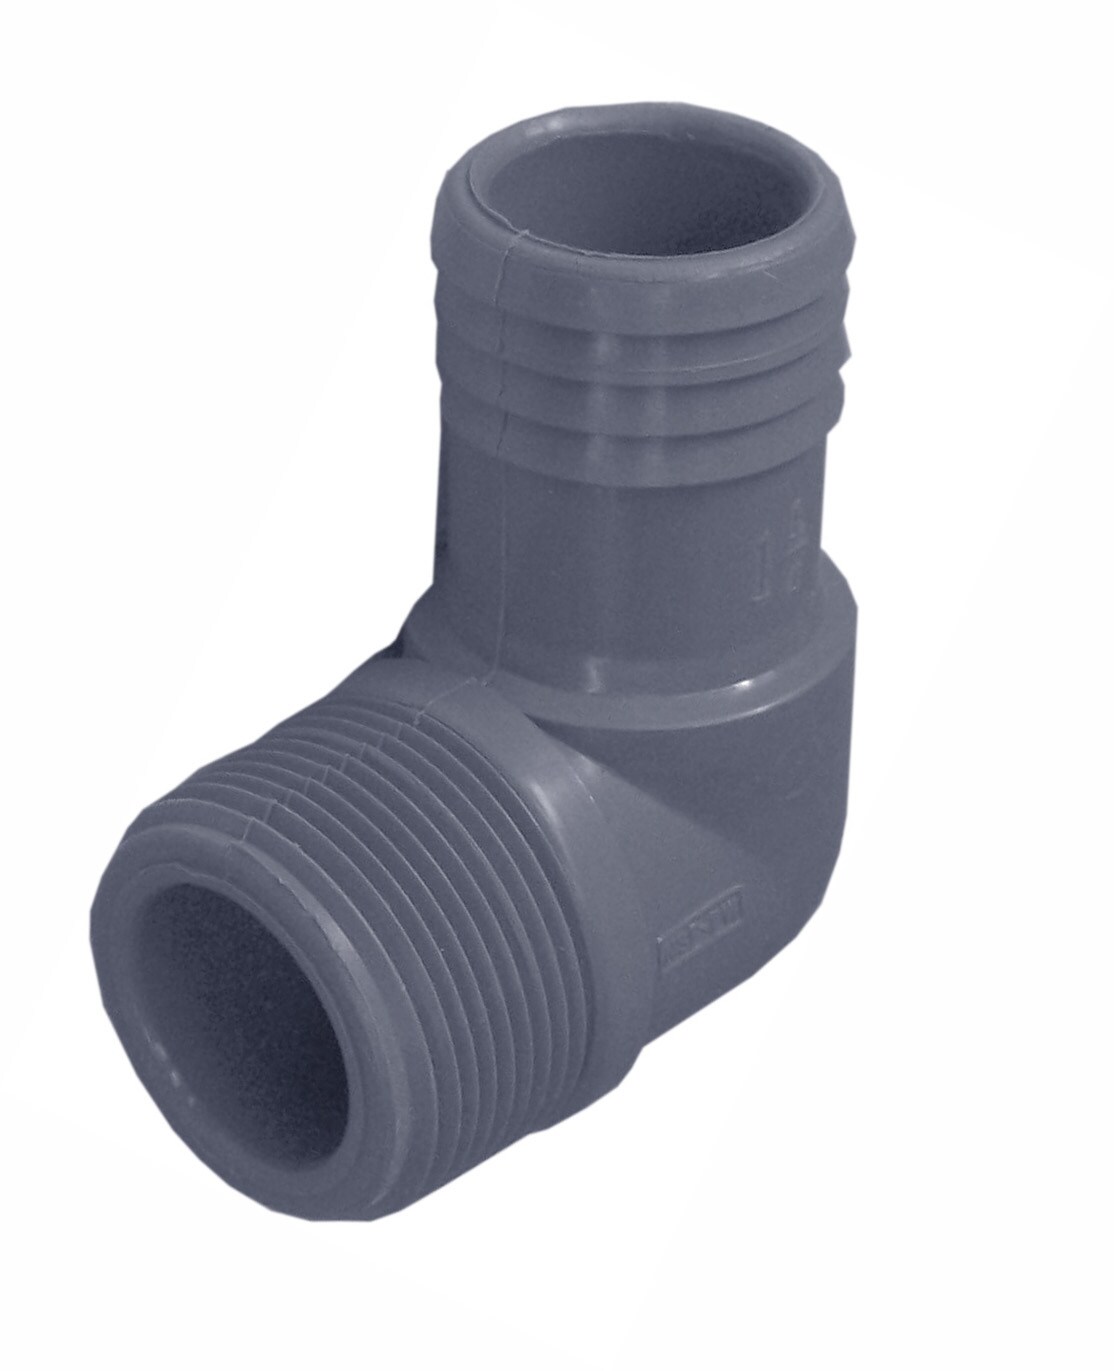 GUYCO Rural Poly Pipe Fitting Female Elbow 1 1/2" 1 1/4 GR 654 